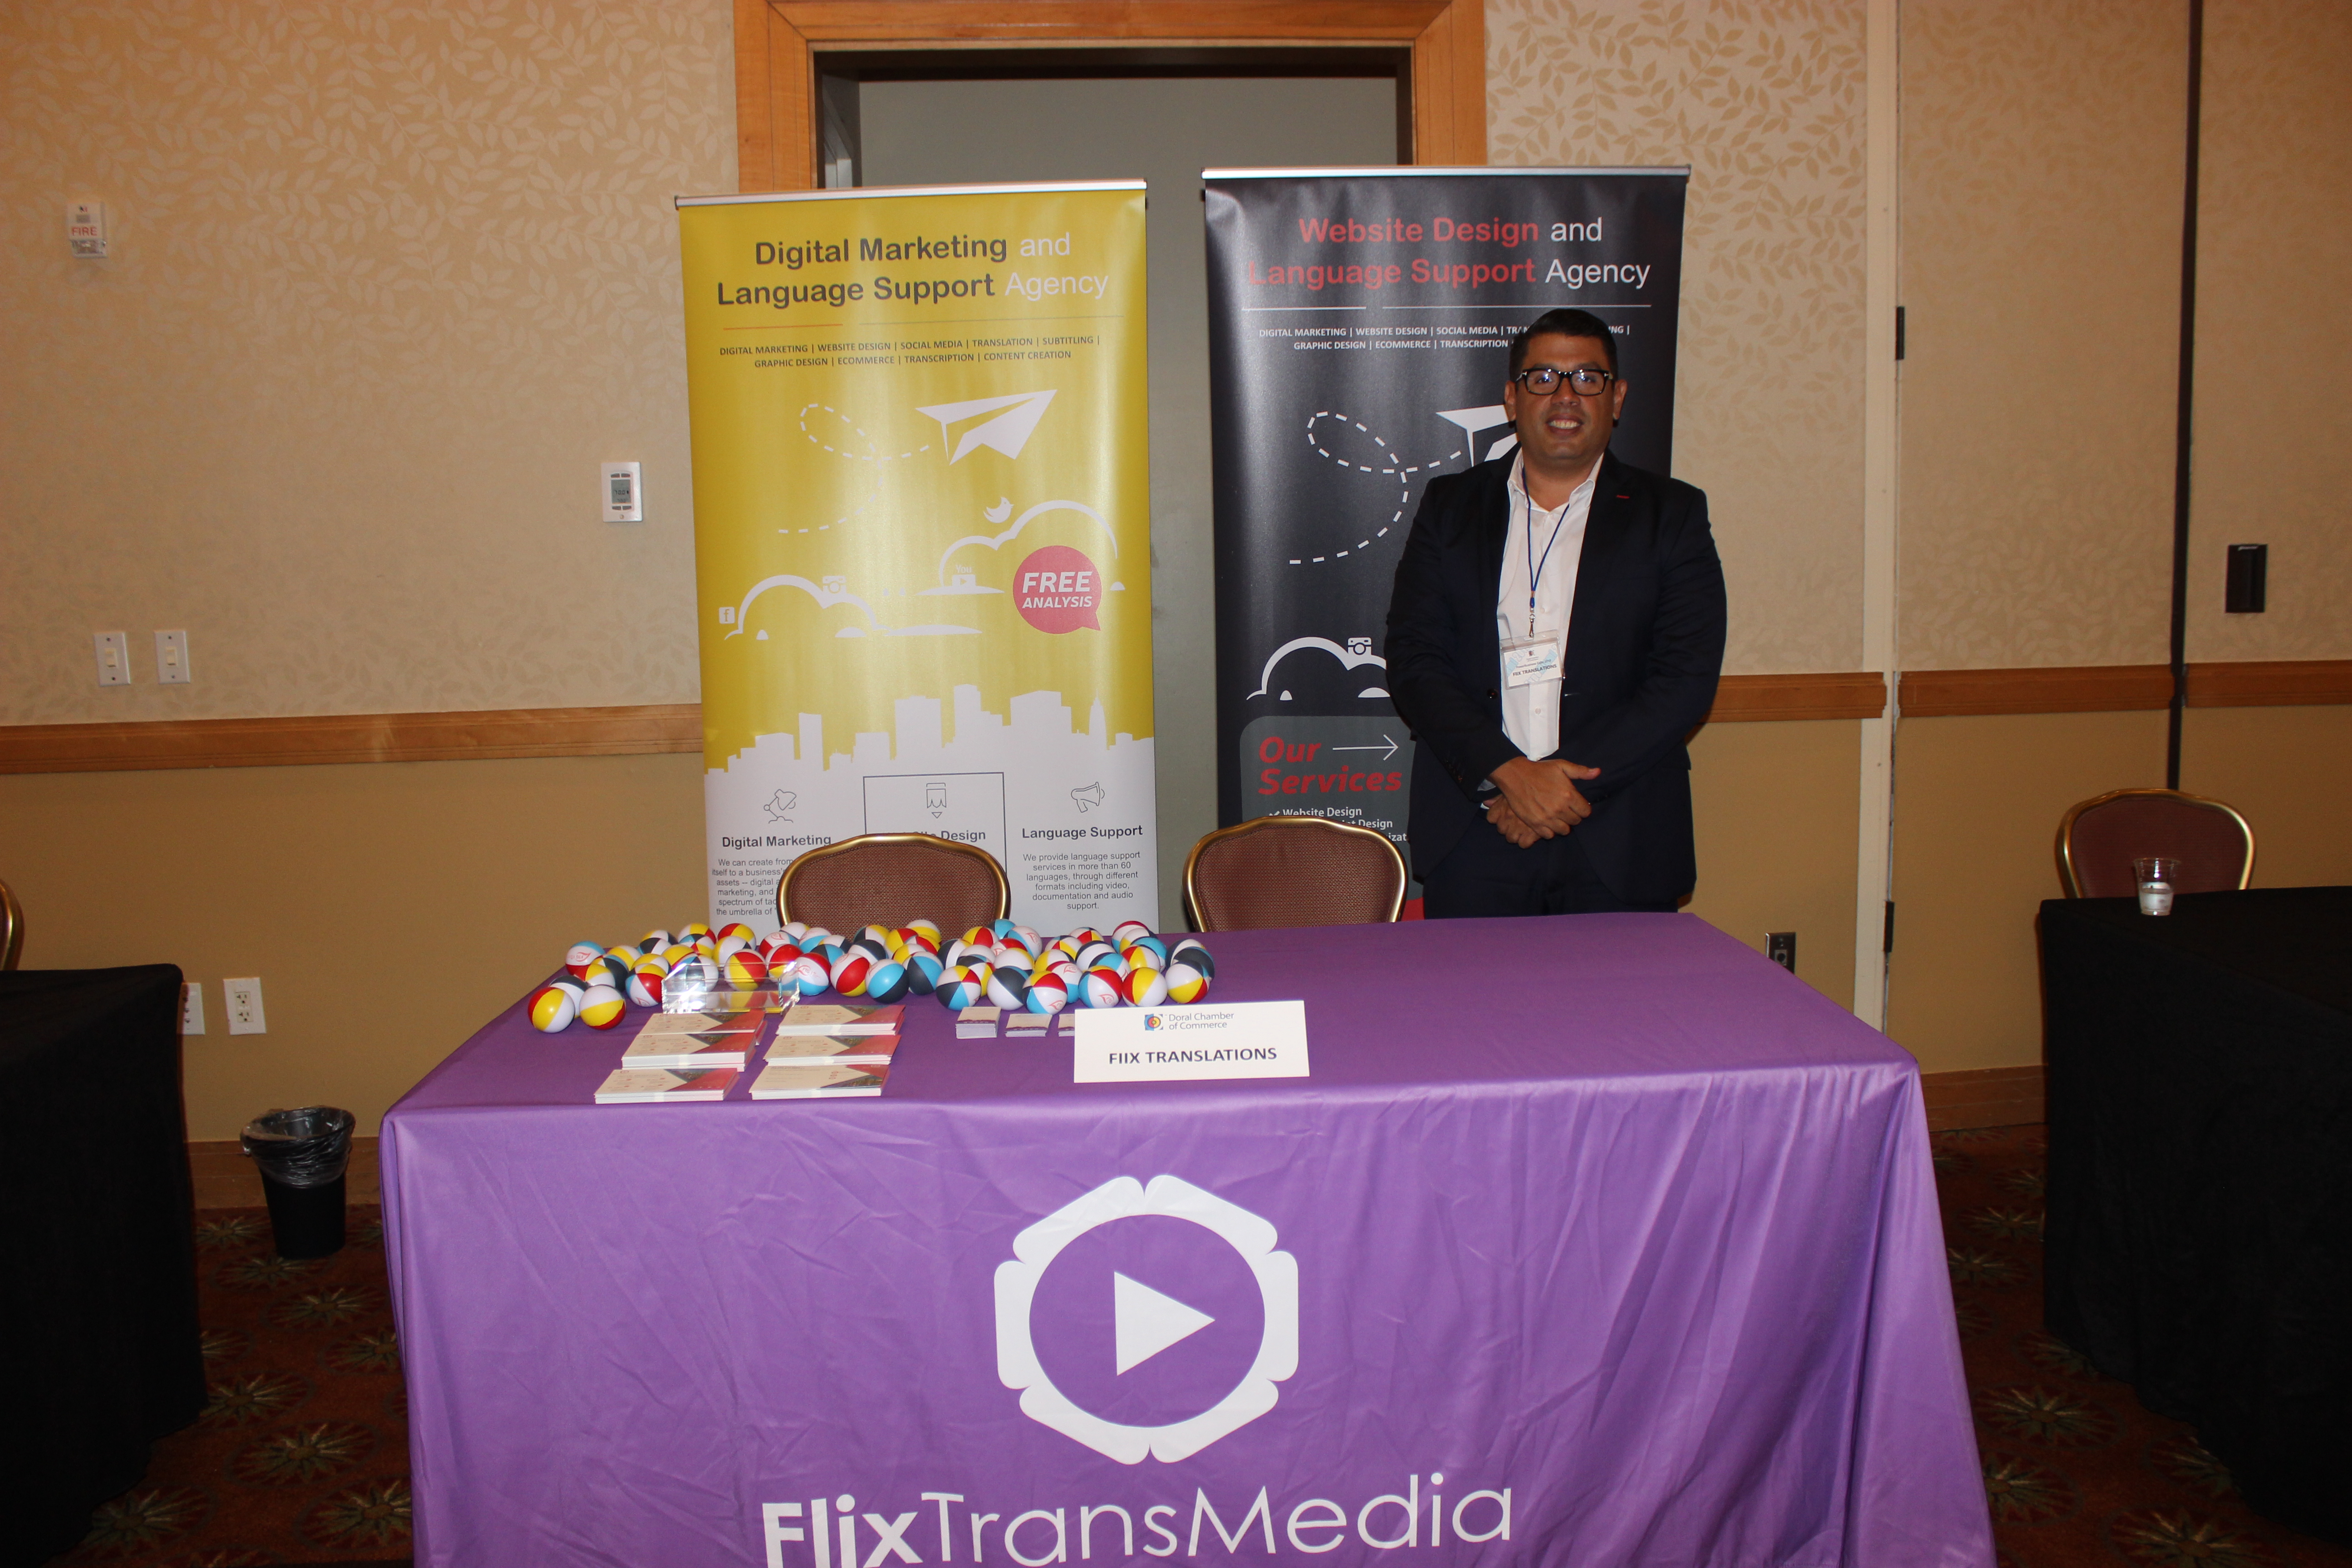 FlixTransMedia representing business in ExpoMiami 2018 hosted by the Doral Chamber of Commerce.